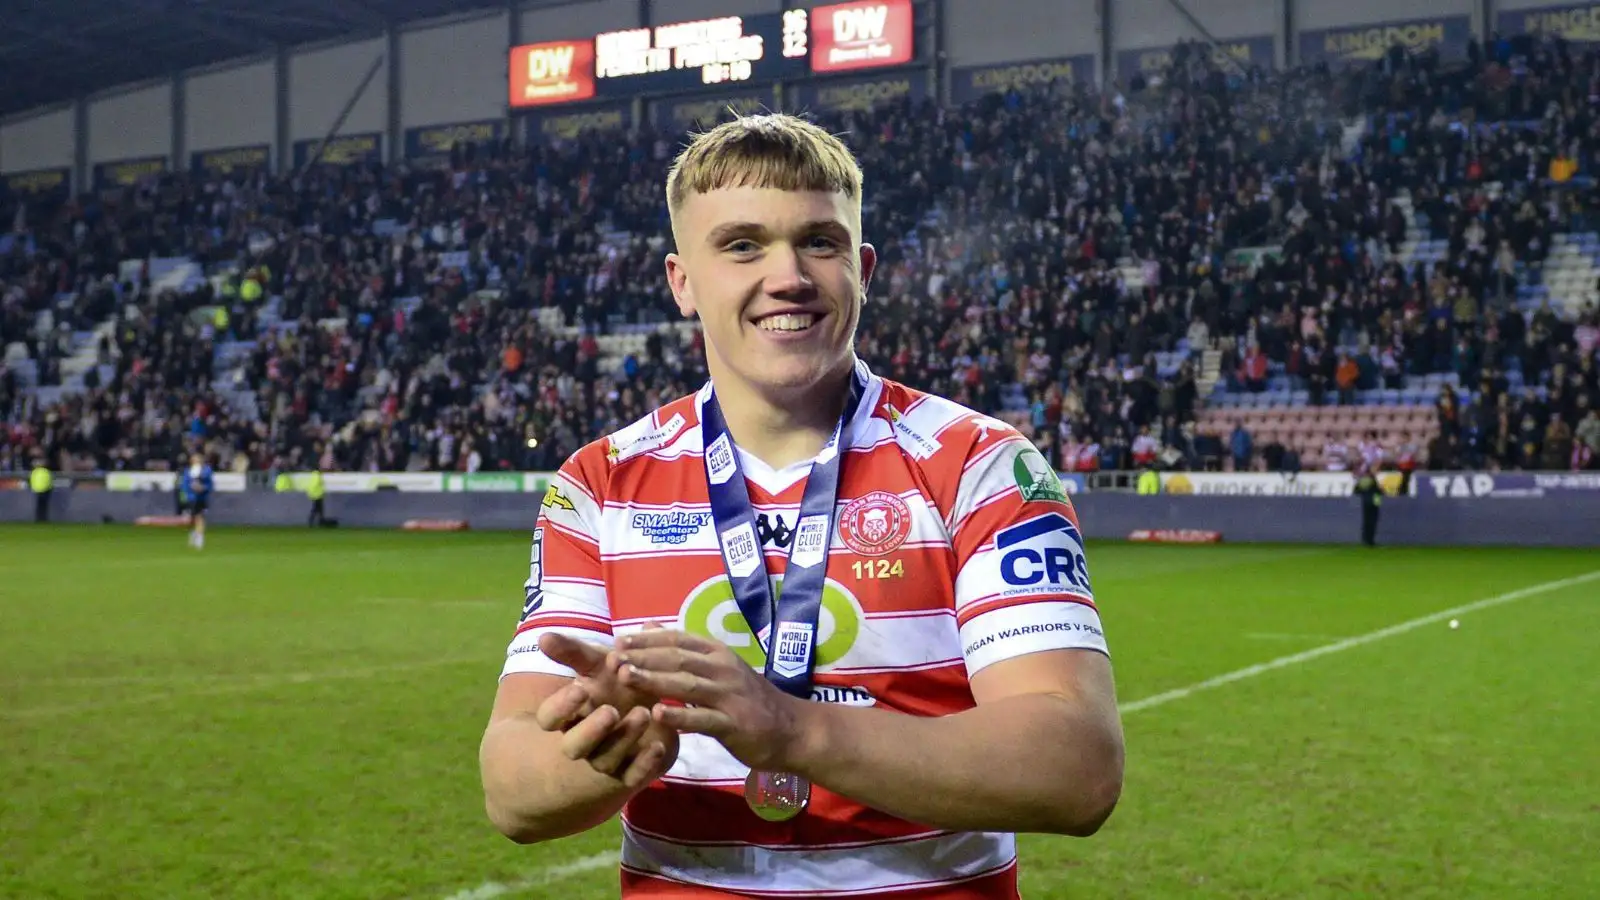 Charting the remarkable rise of Wigan Warriors’ proud Cumbrian prop Harvie Hill